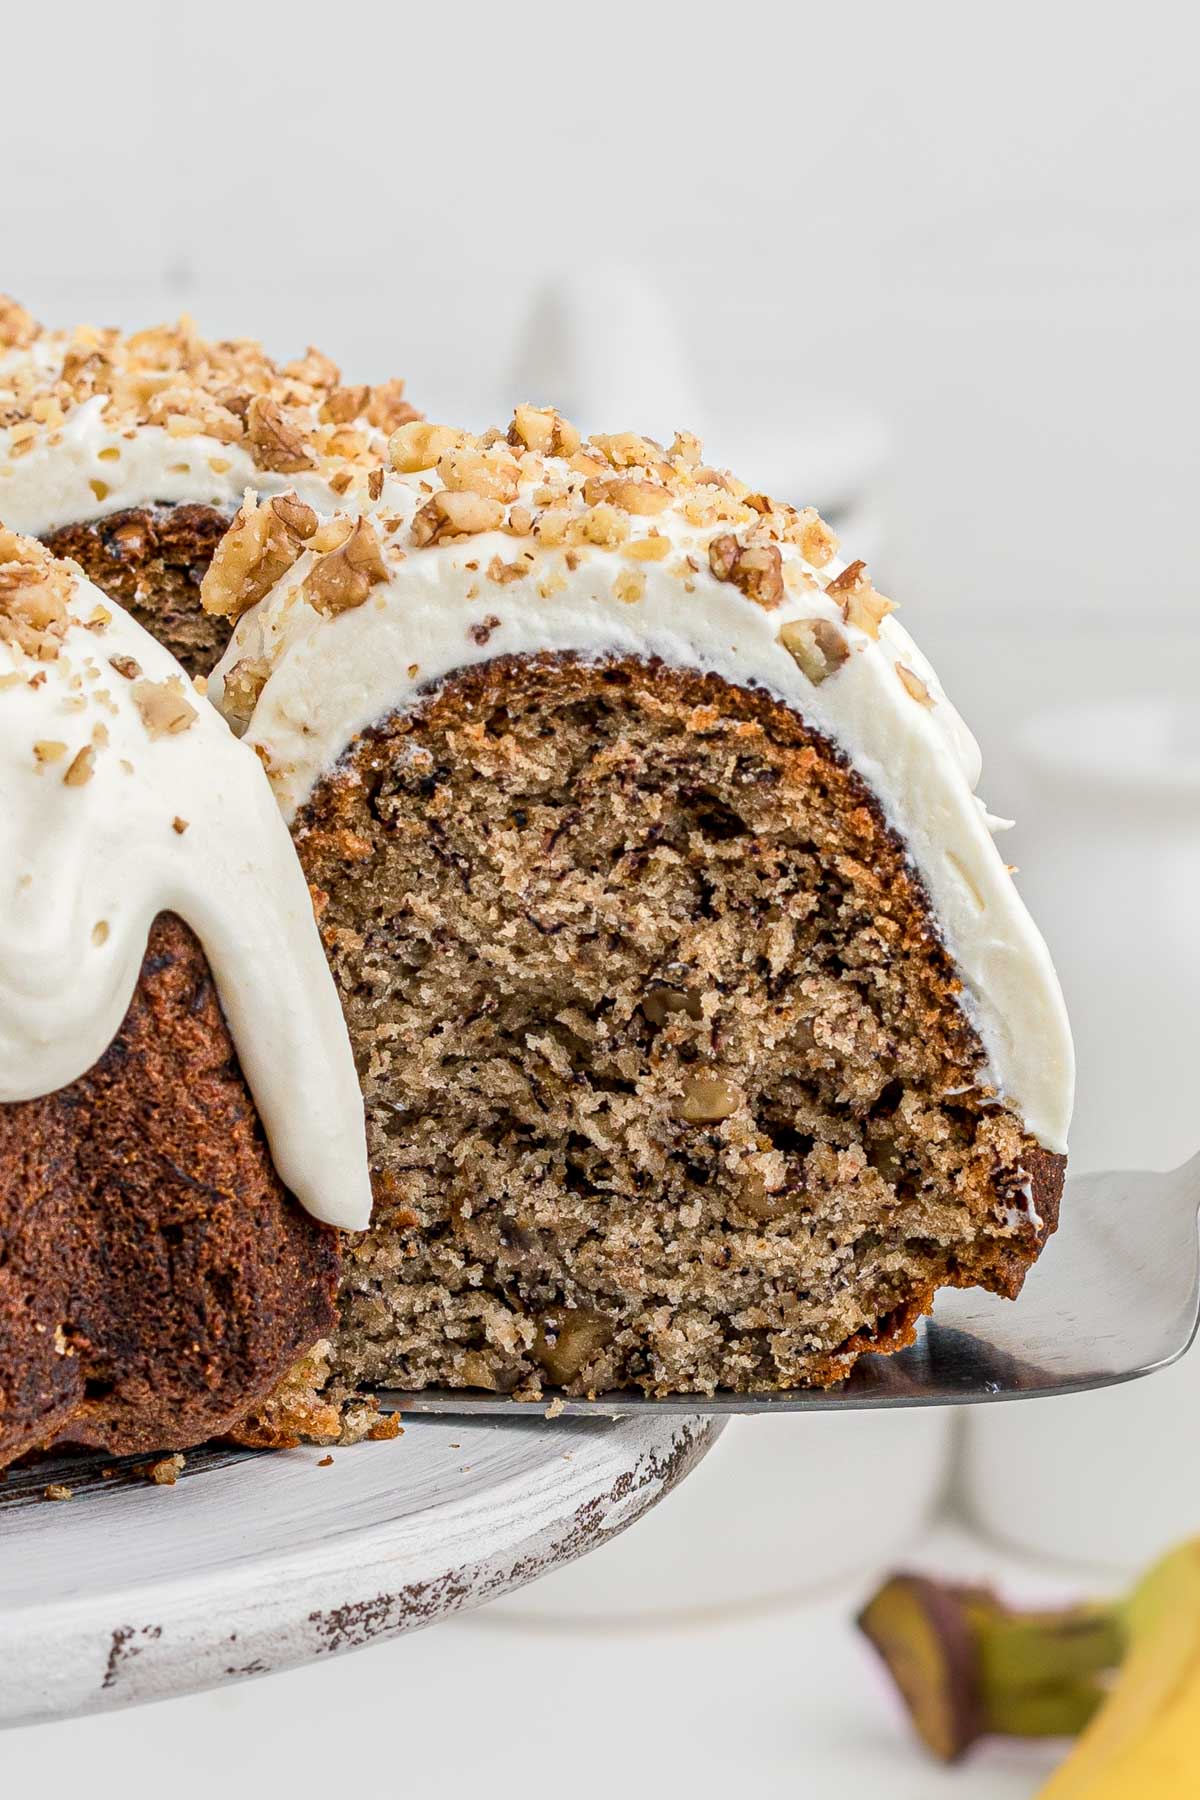 banana bundt cake with a slice removed, exposing the inside